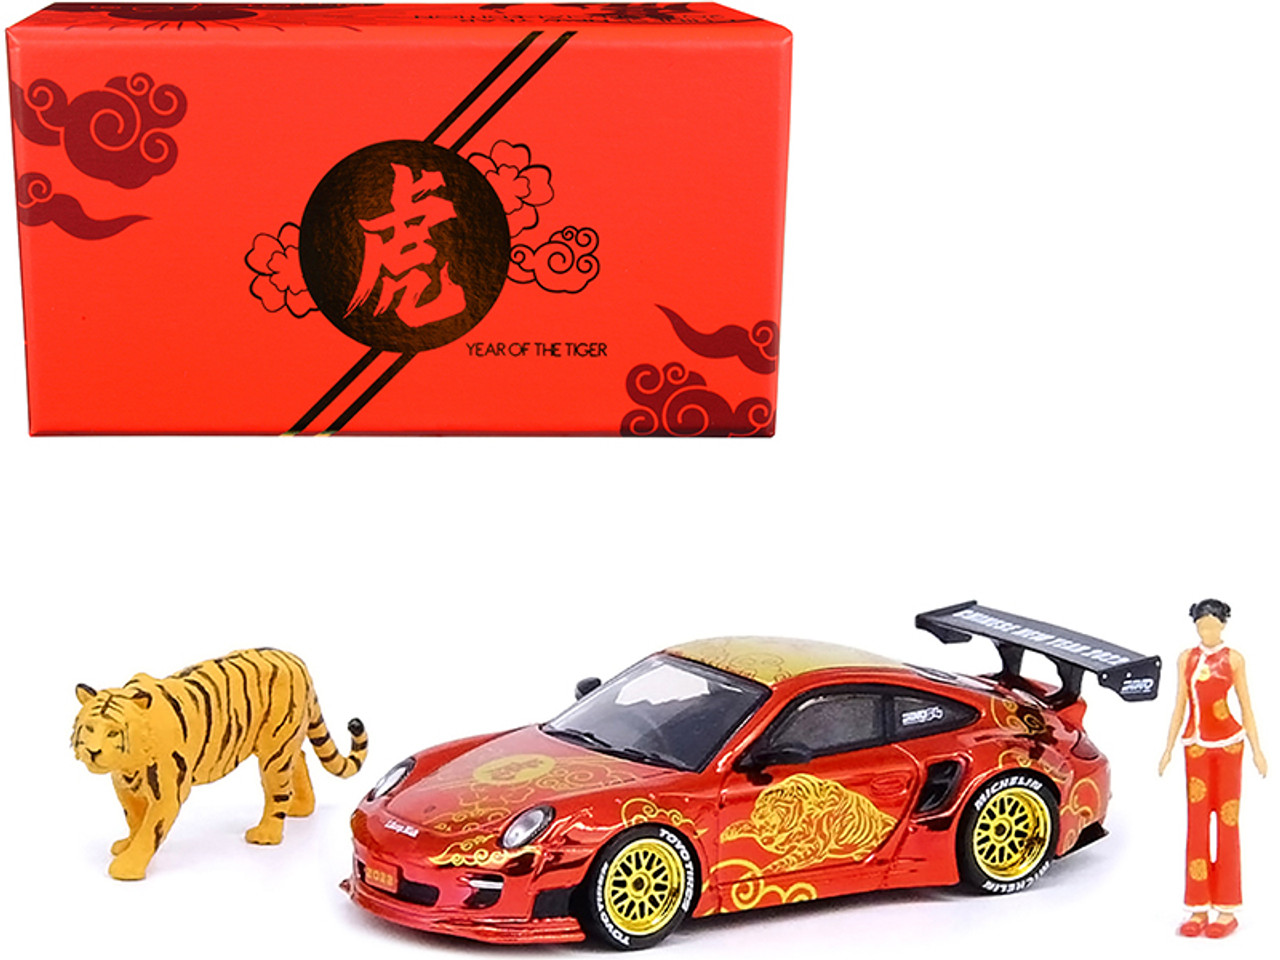 1/64 INNO 64 997 LBWK "YEAR OF THE TIGER 2022" Chinese New Year 2022 Special Edition Figures included Diecast Car Model